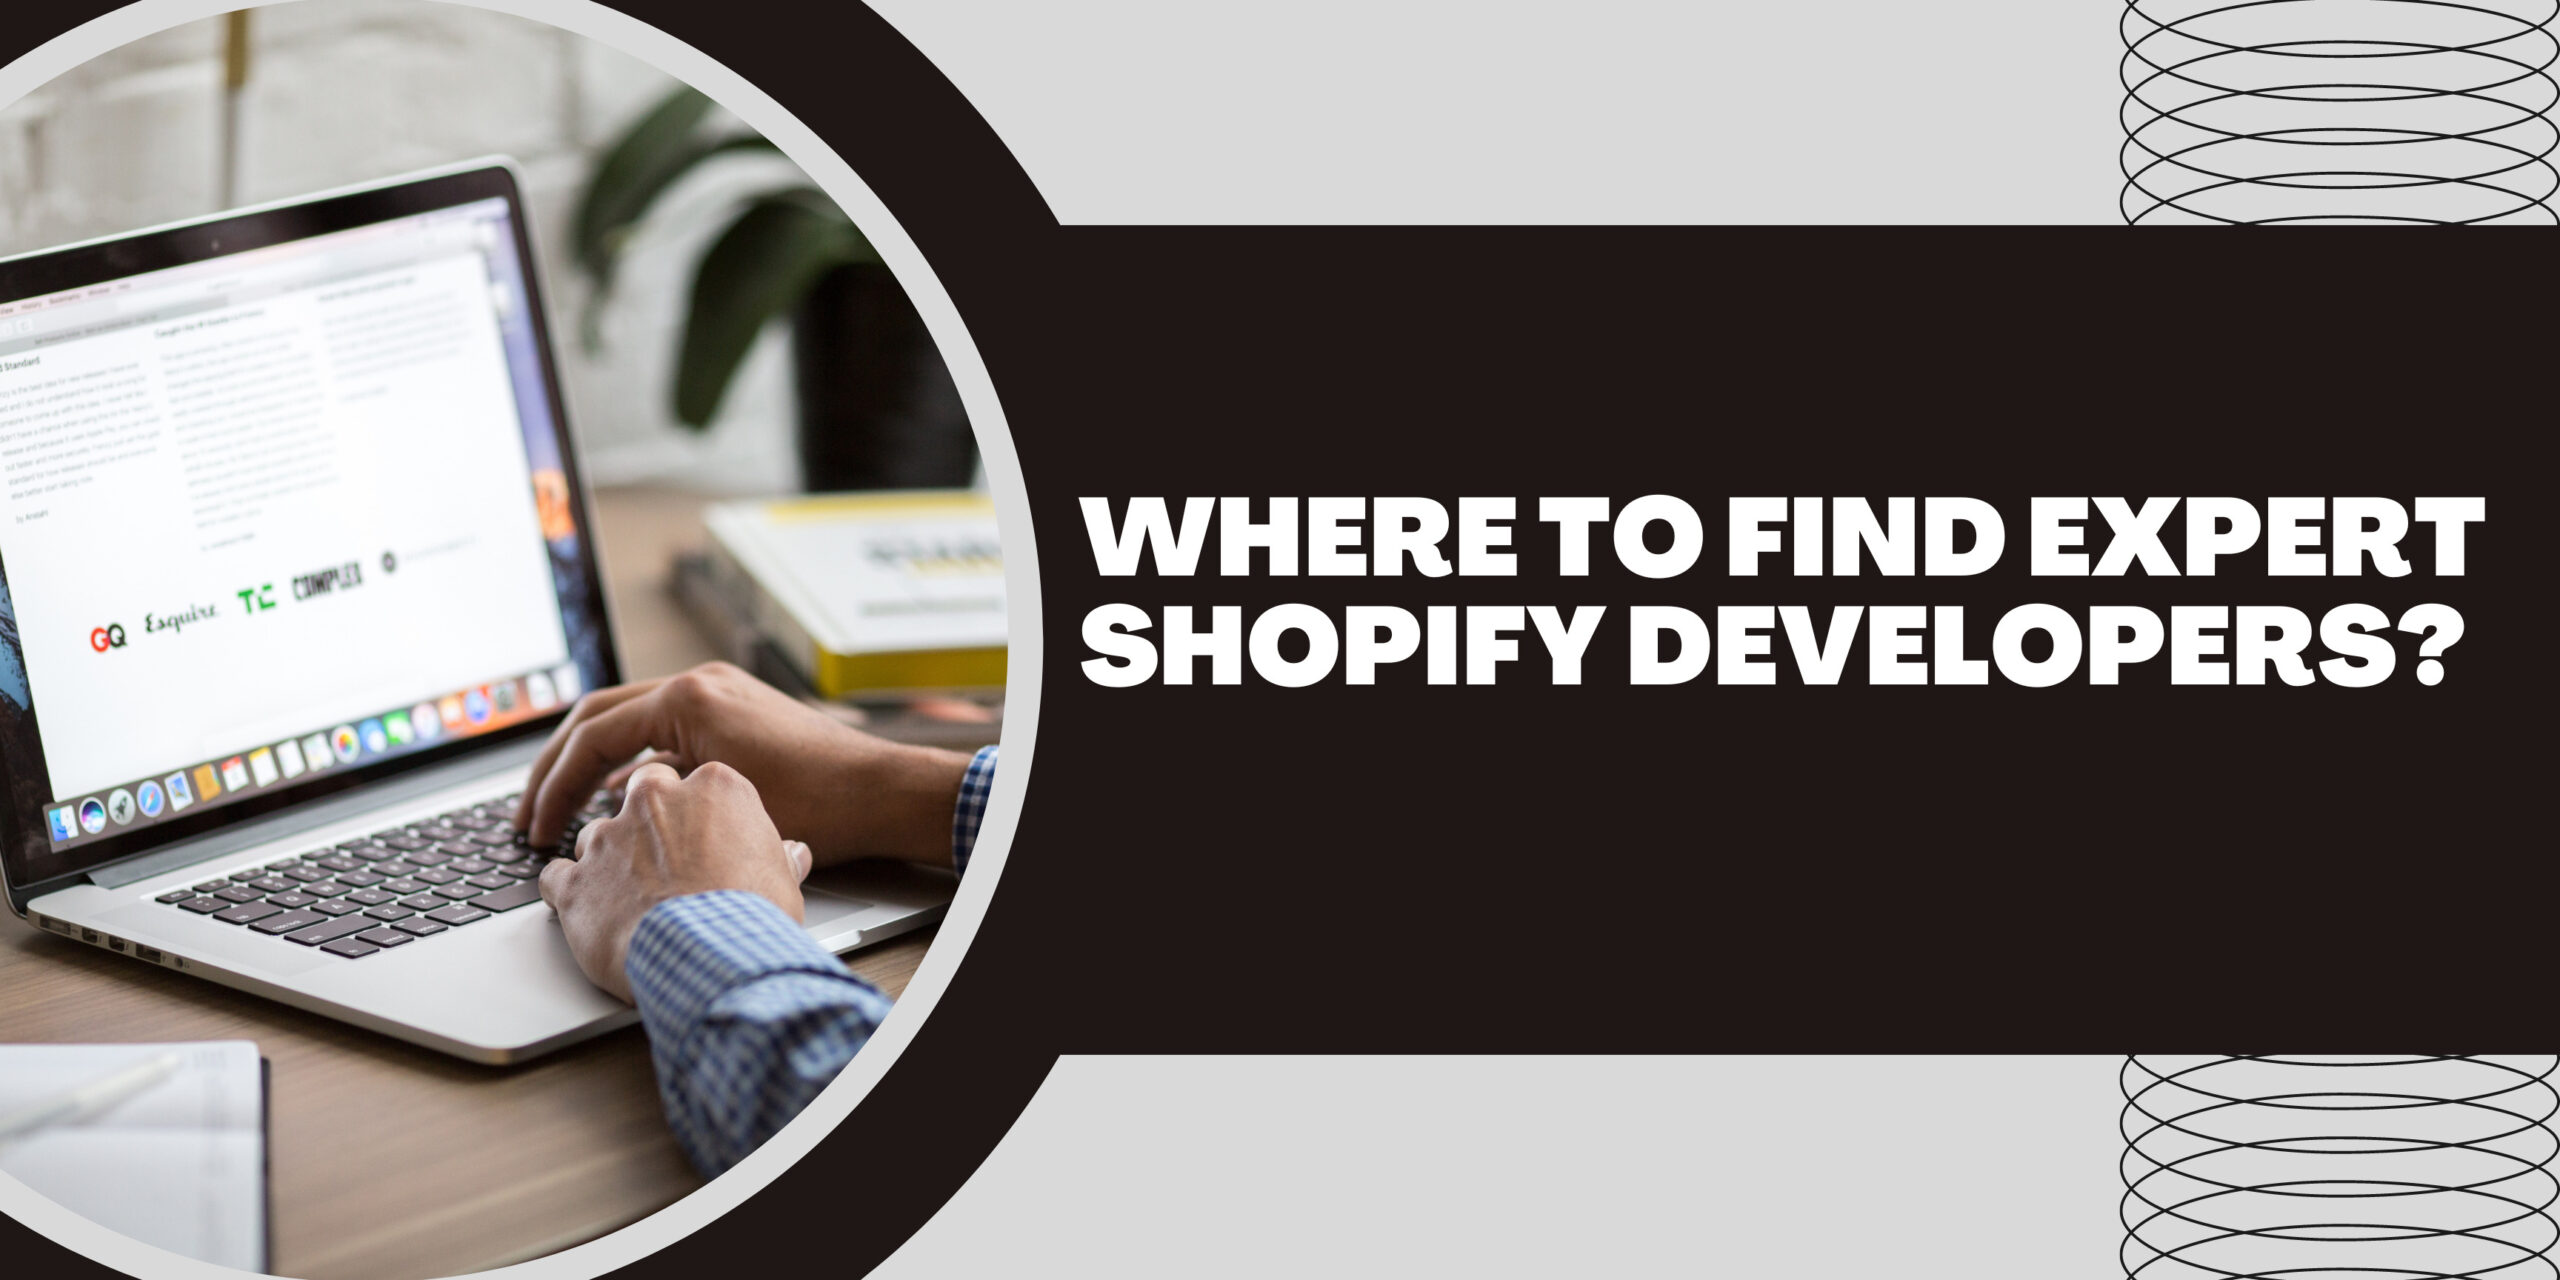 Where to Find Expert Shopify Developers?